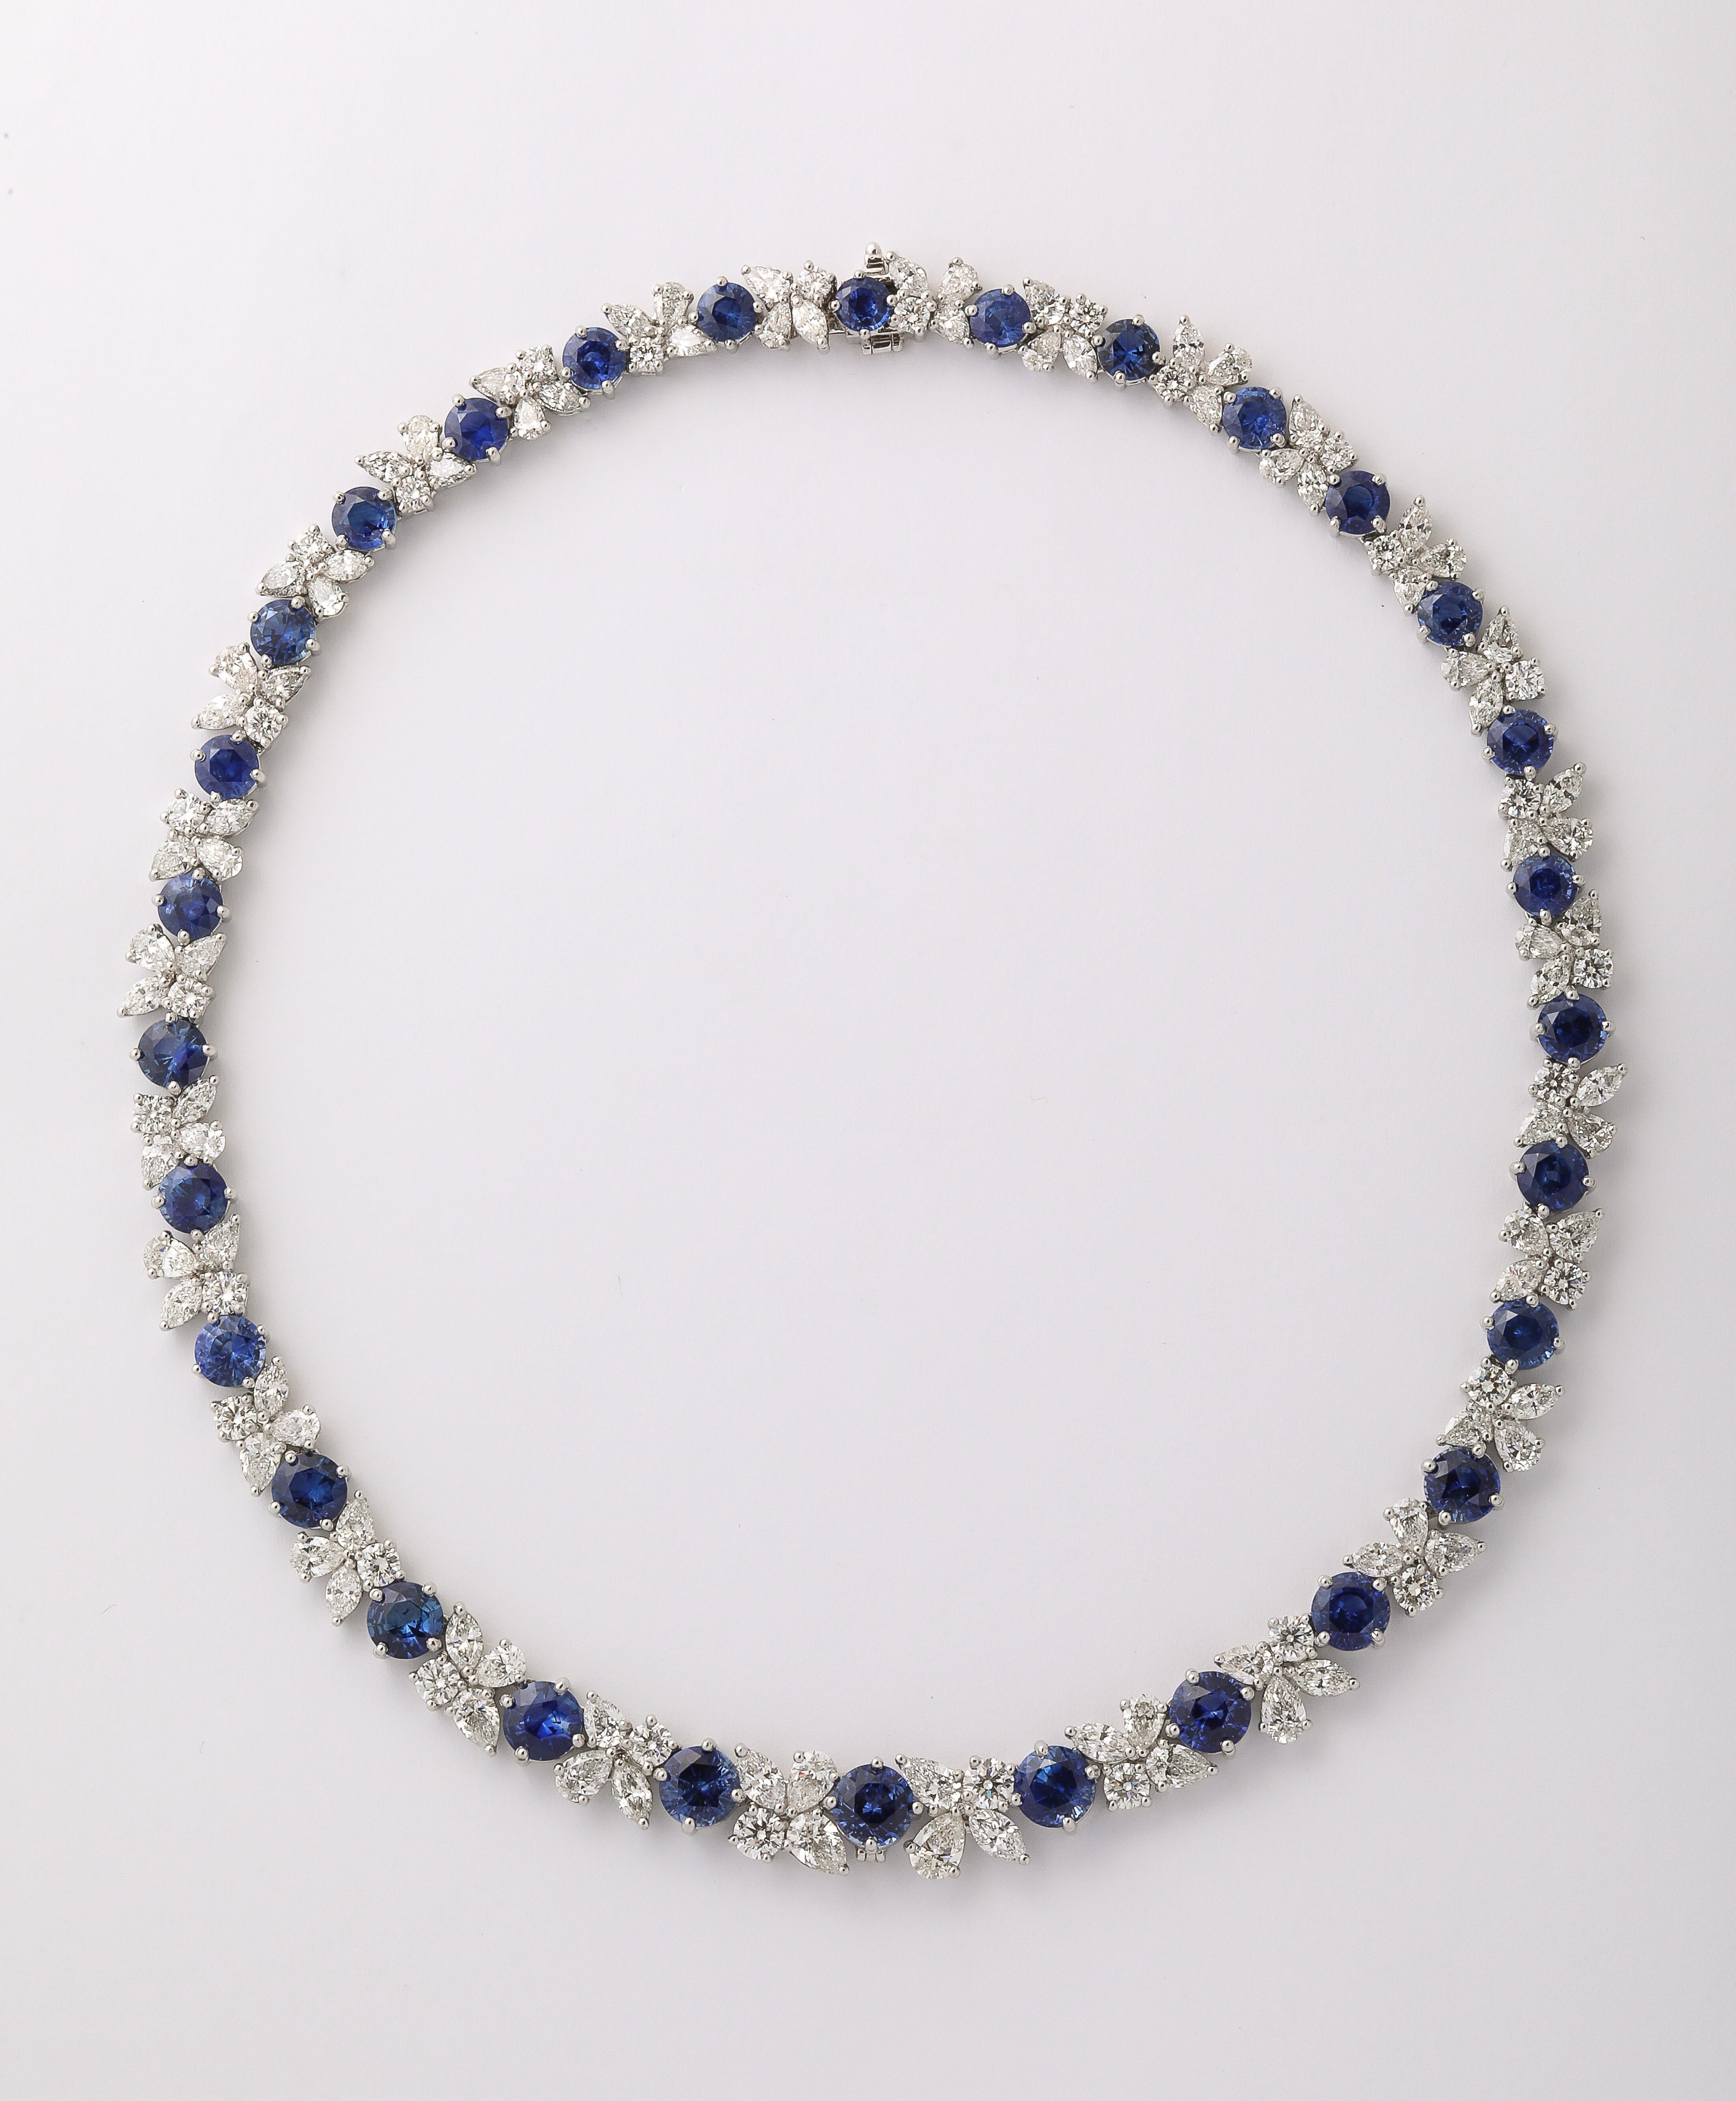 
A FABULOUS Blue Sapphire and Diamond Necklace. 

38.30 carats of certified Round Blue Sapphires. 

28.02 carats of white round brilliant and pear shaped diamonds. 

Set in platinum. 

A layout of round blue sapphires of this color and brilliance is